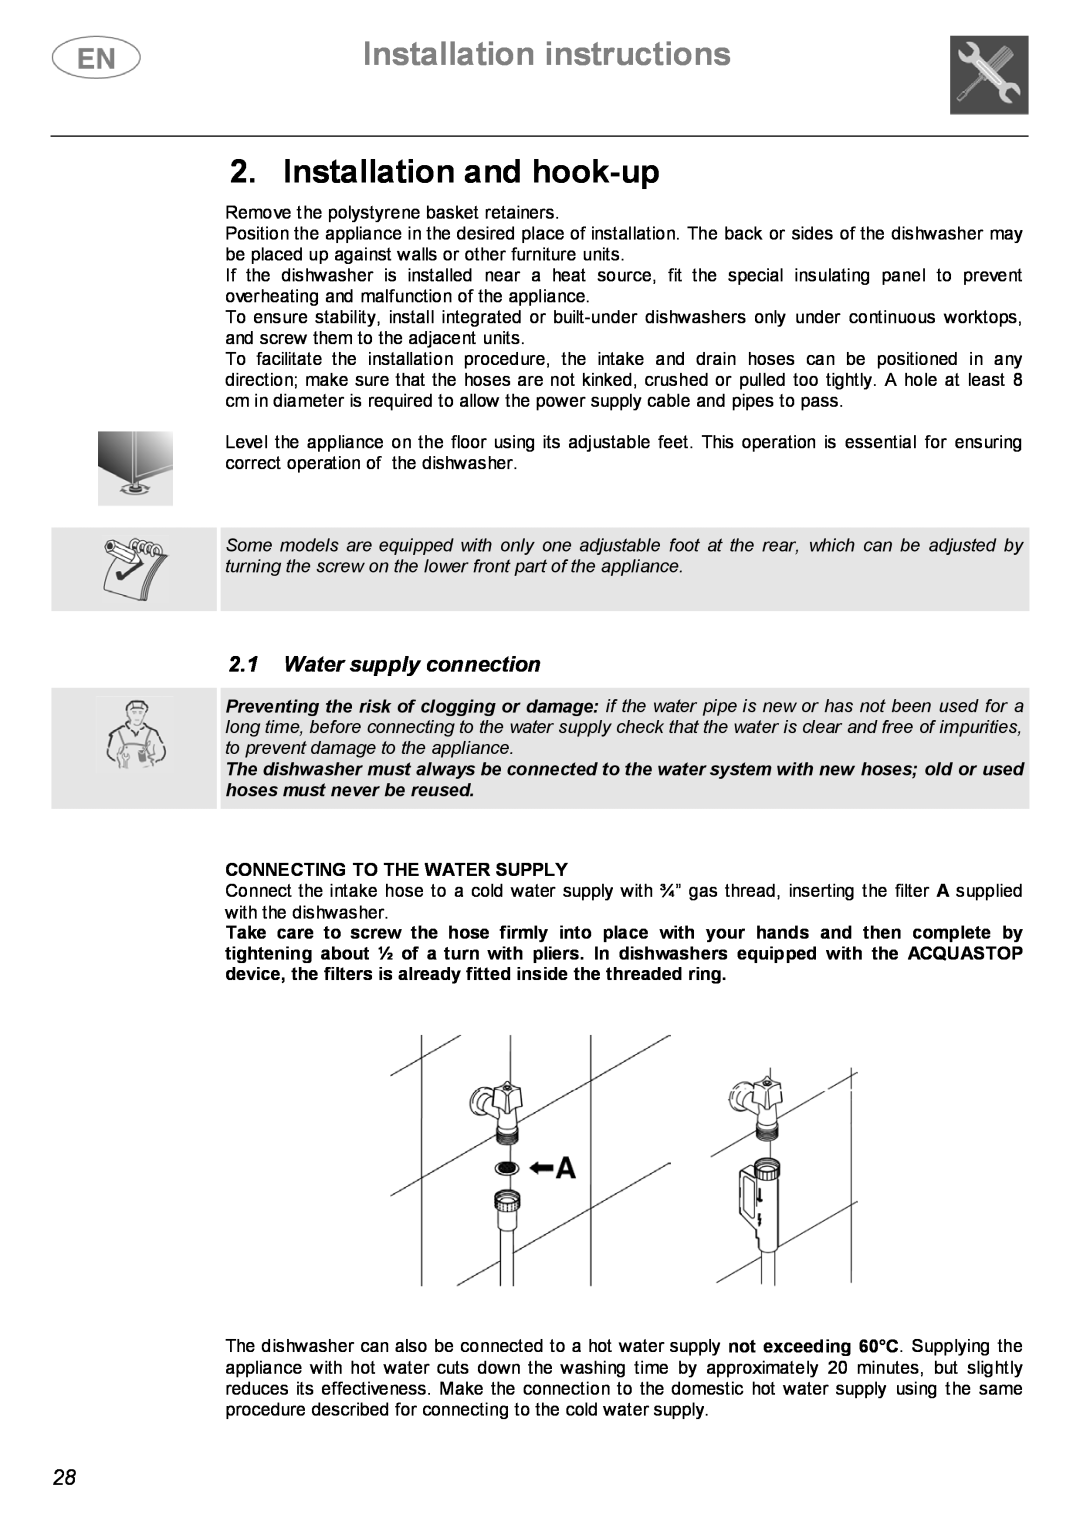 Smeg DWF614SS, DWF614WH manual Installation instructions, Installation and hook-up, 2.1Water supply connection 